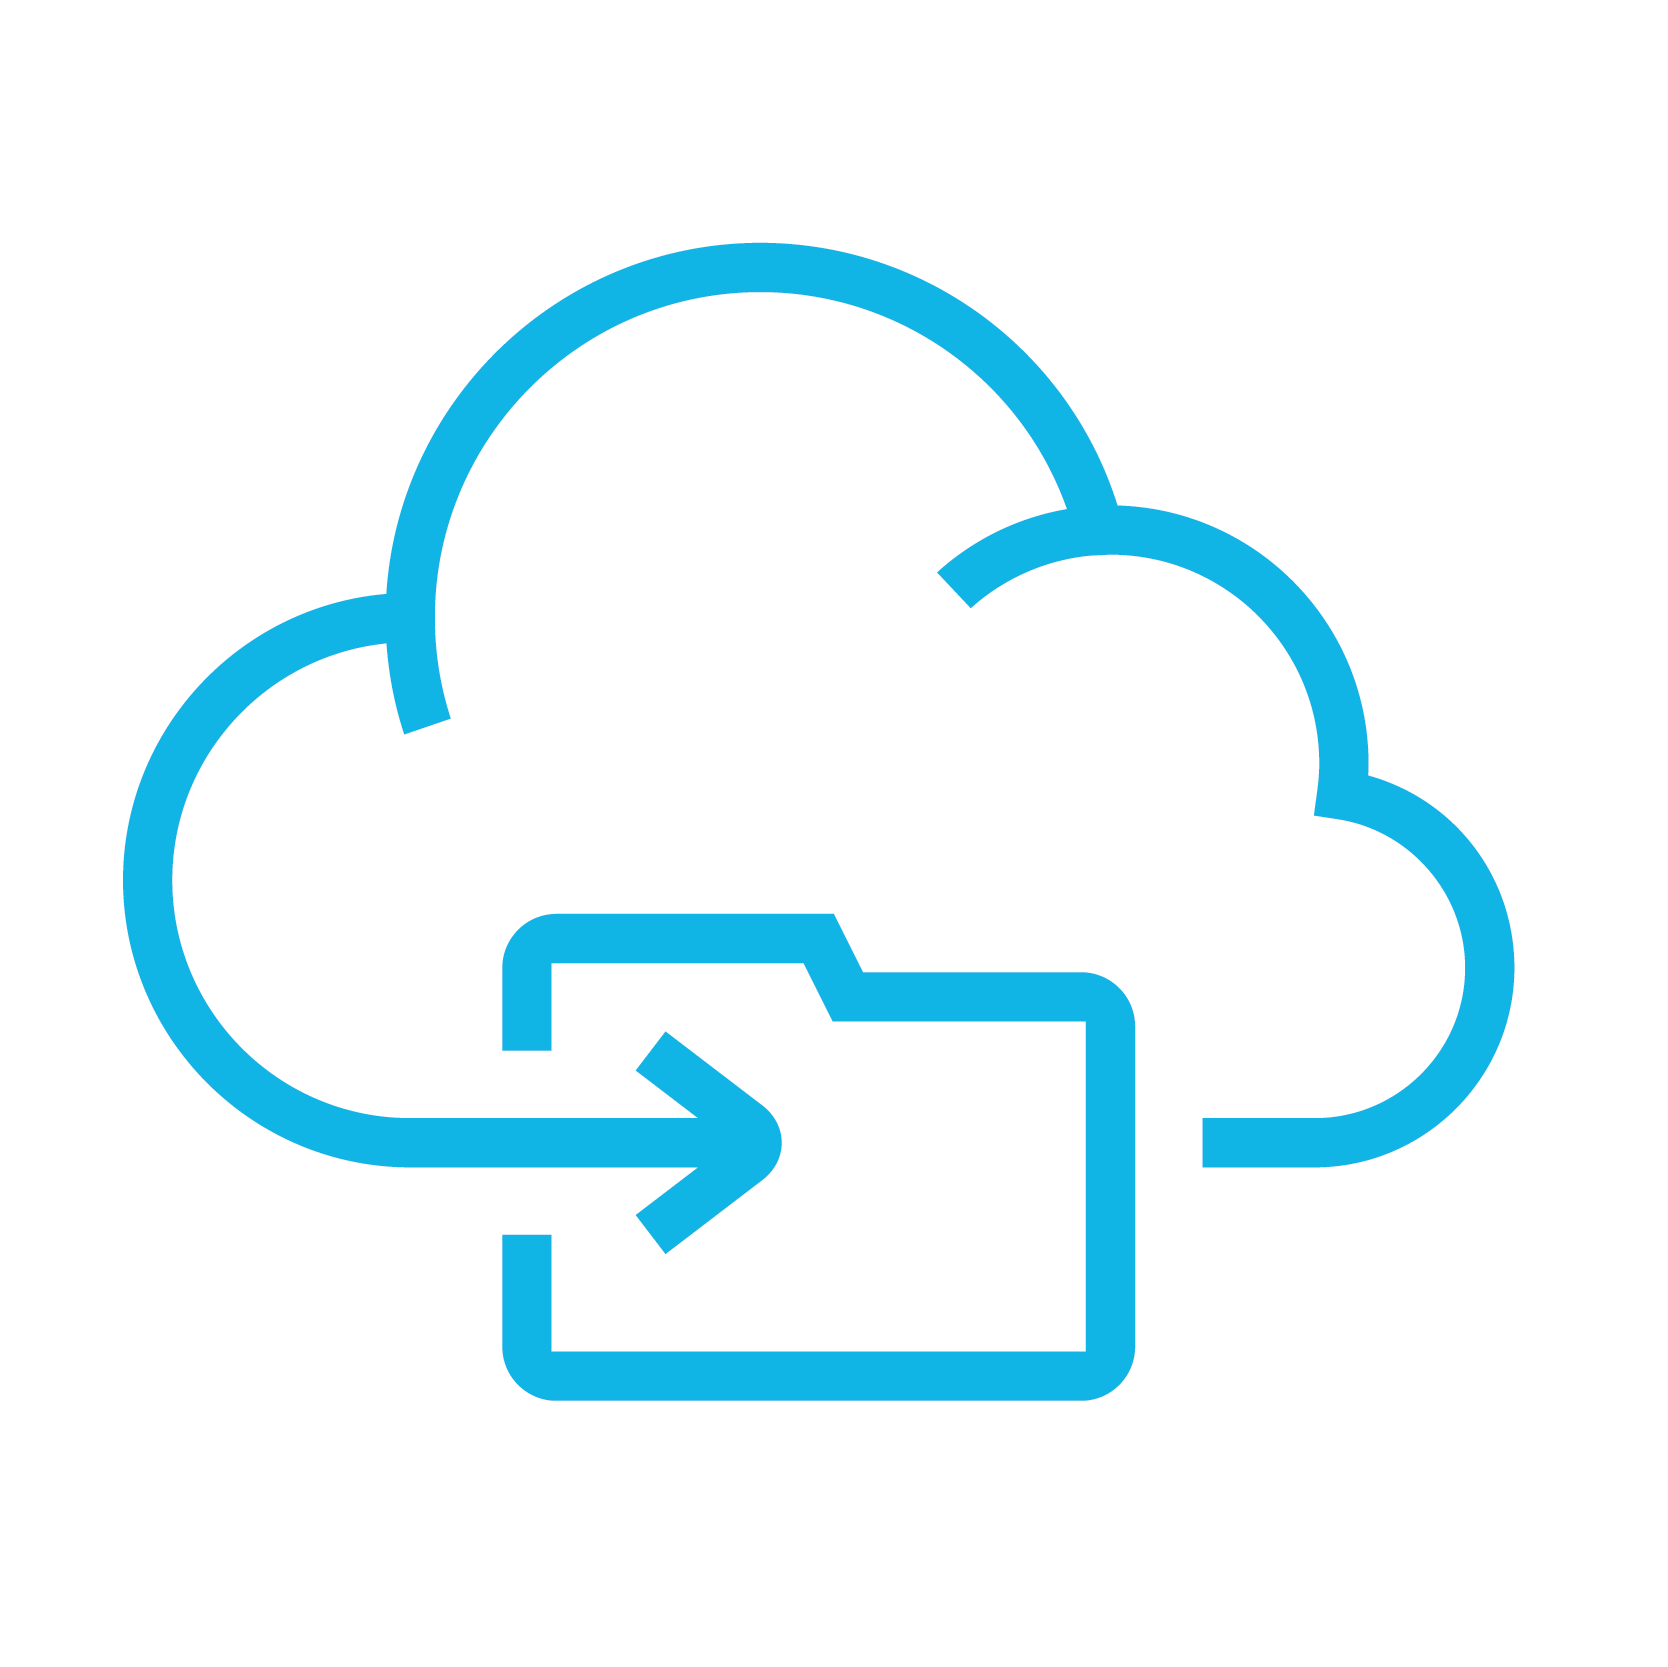 Cloud Flexibility - This is an icon of a cloud wrapped around a file folder.  This represents the fact that you have access to your data anywhere and at any time when you use HammerTech's platform.  